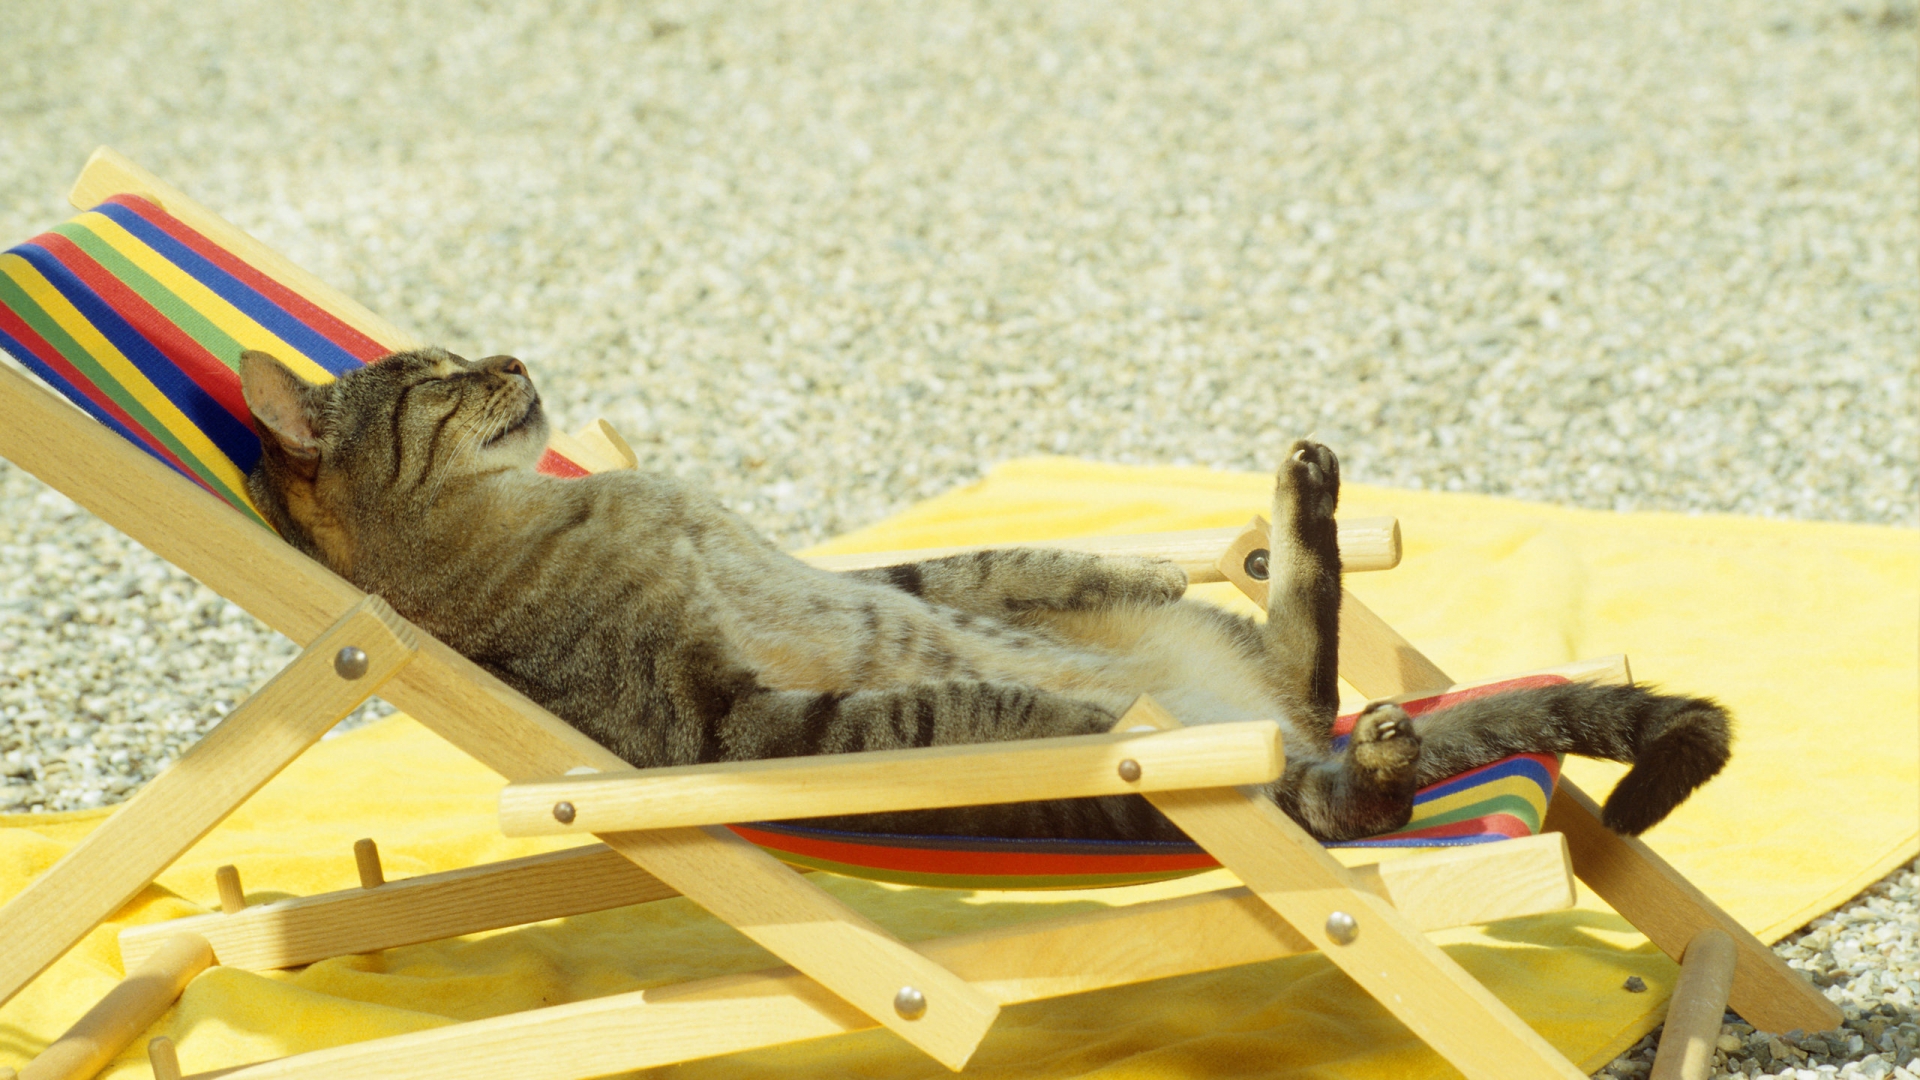 Cat relaxing on lounge chair for 1920 x 1080 HDTV 1080p resolution